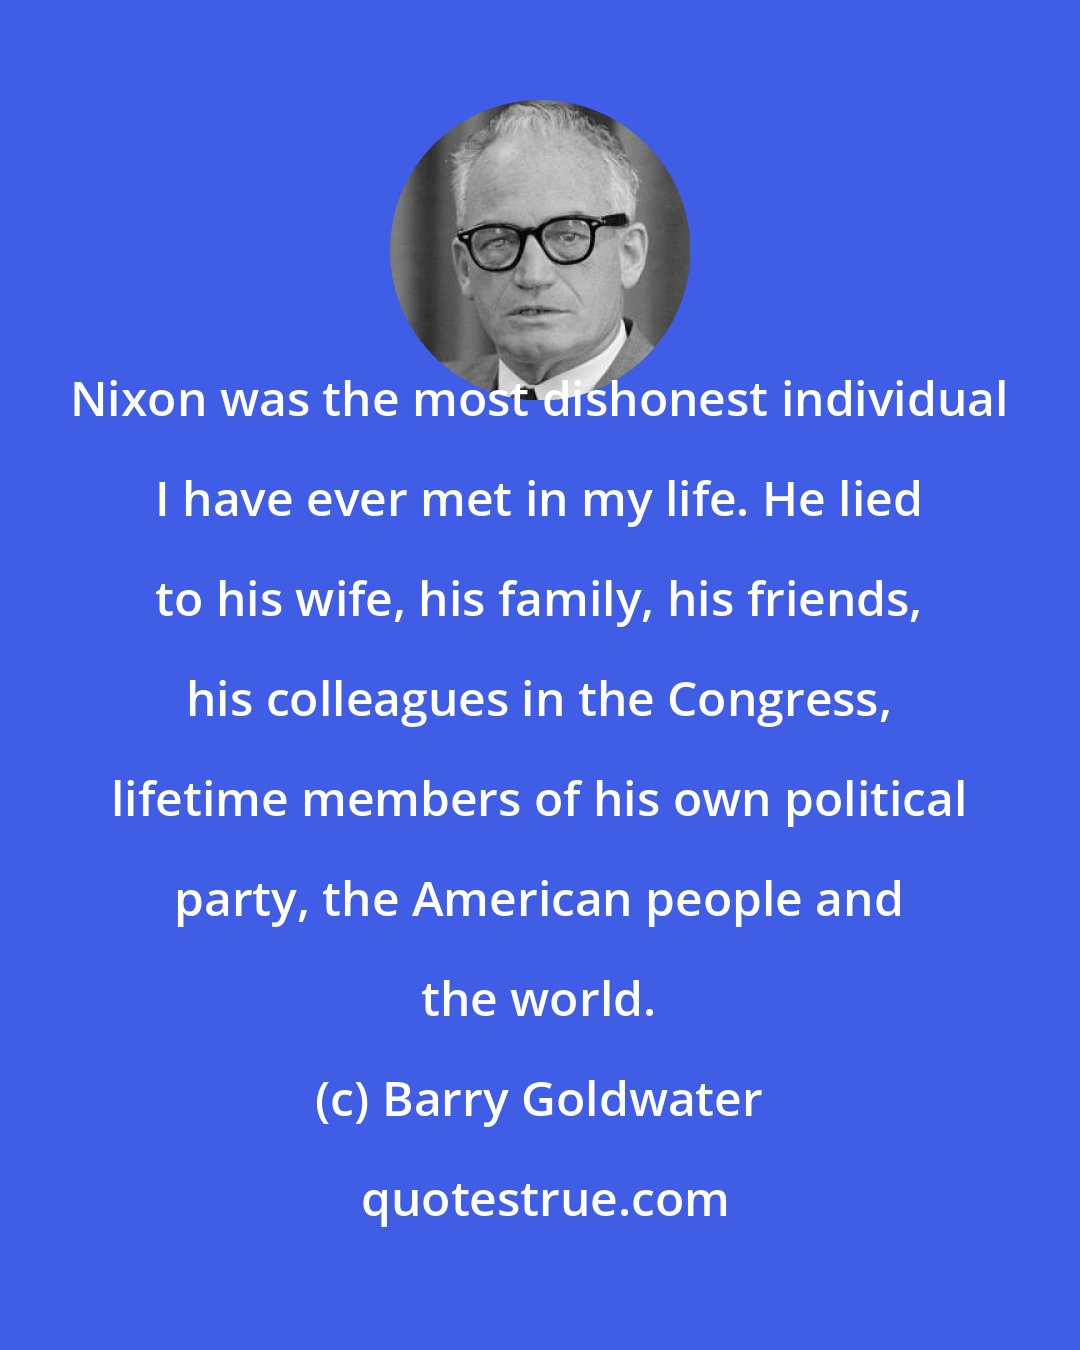 Barry Goldwater: Nixon was the most dishonest individual I have ever met in my life. He lied to his wife, his family, his friends, his colleagues in the Congress, lifetime members of his own political party, the American people and the world.